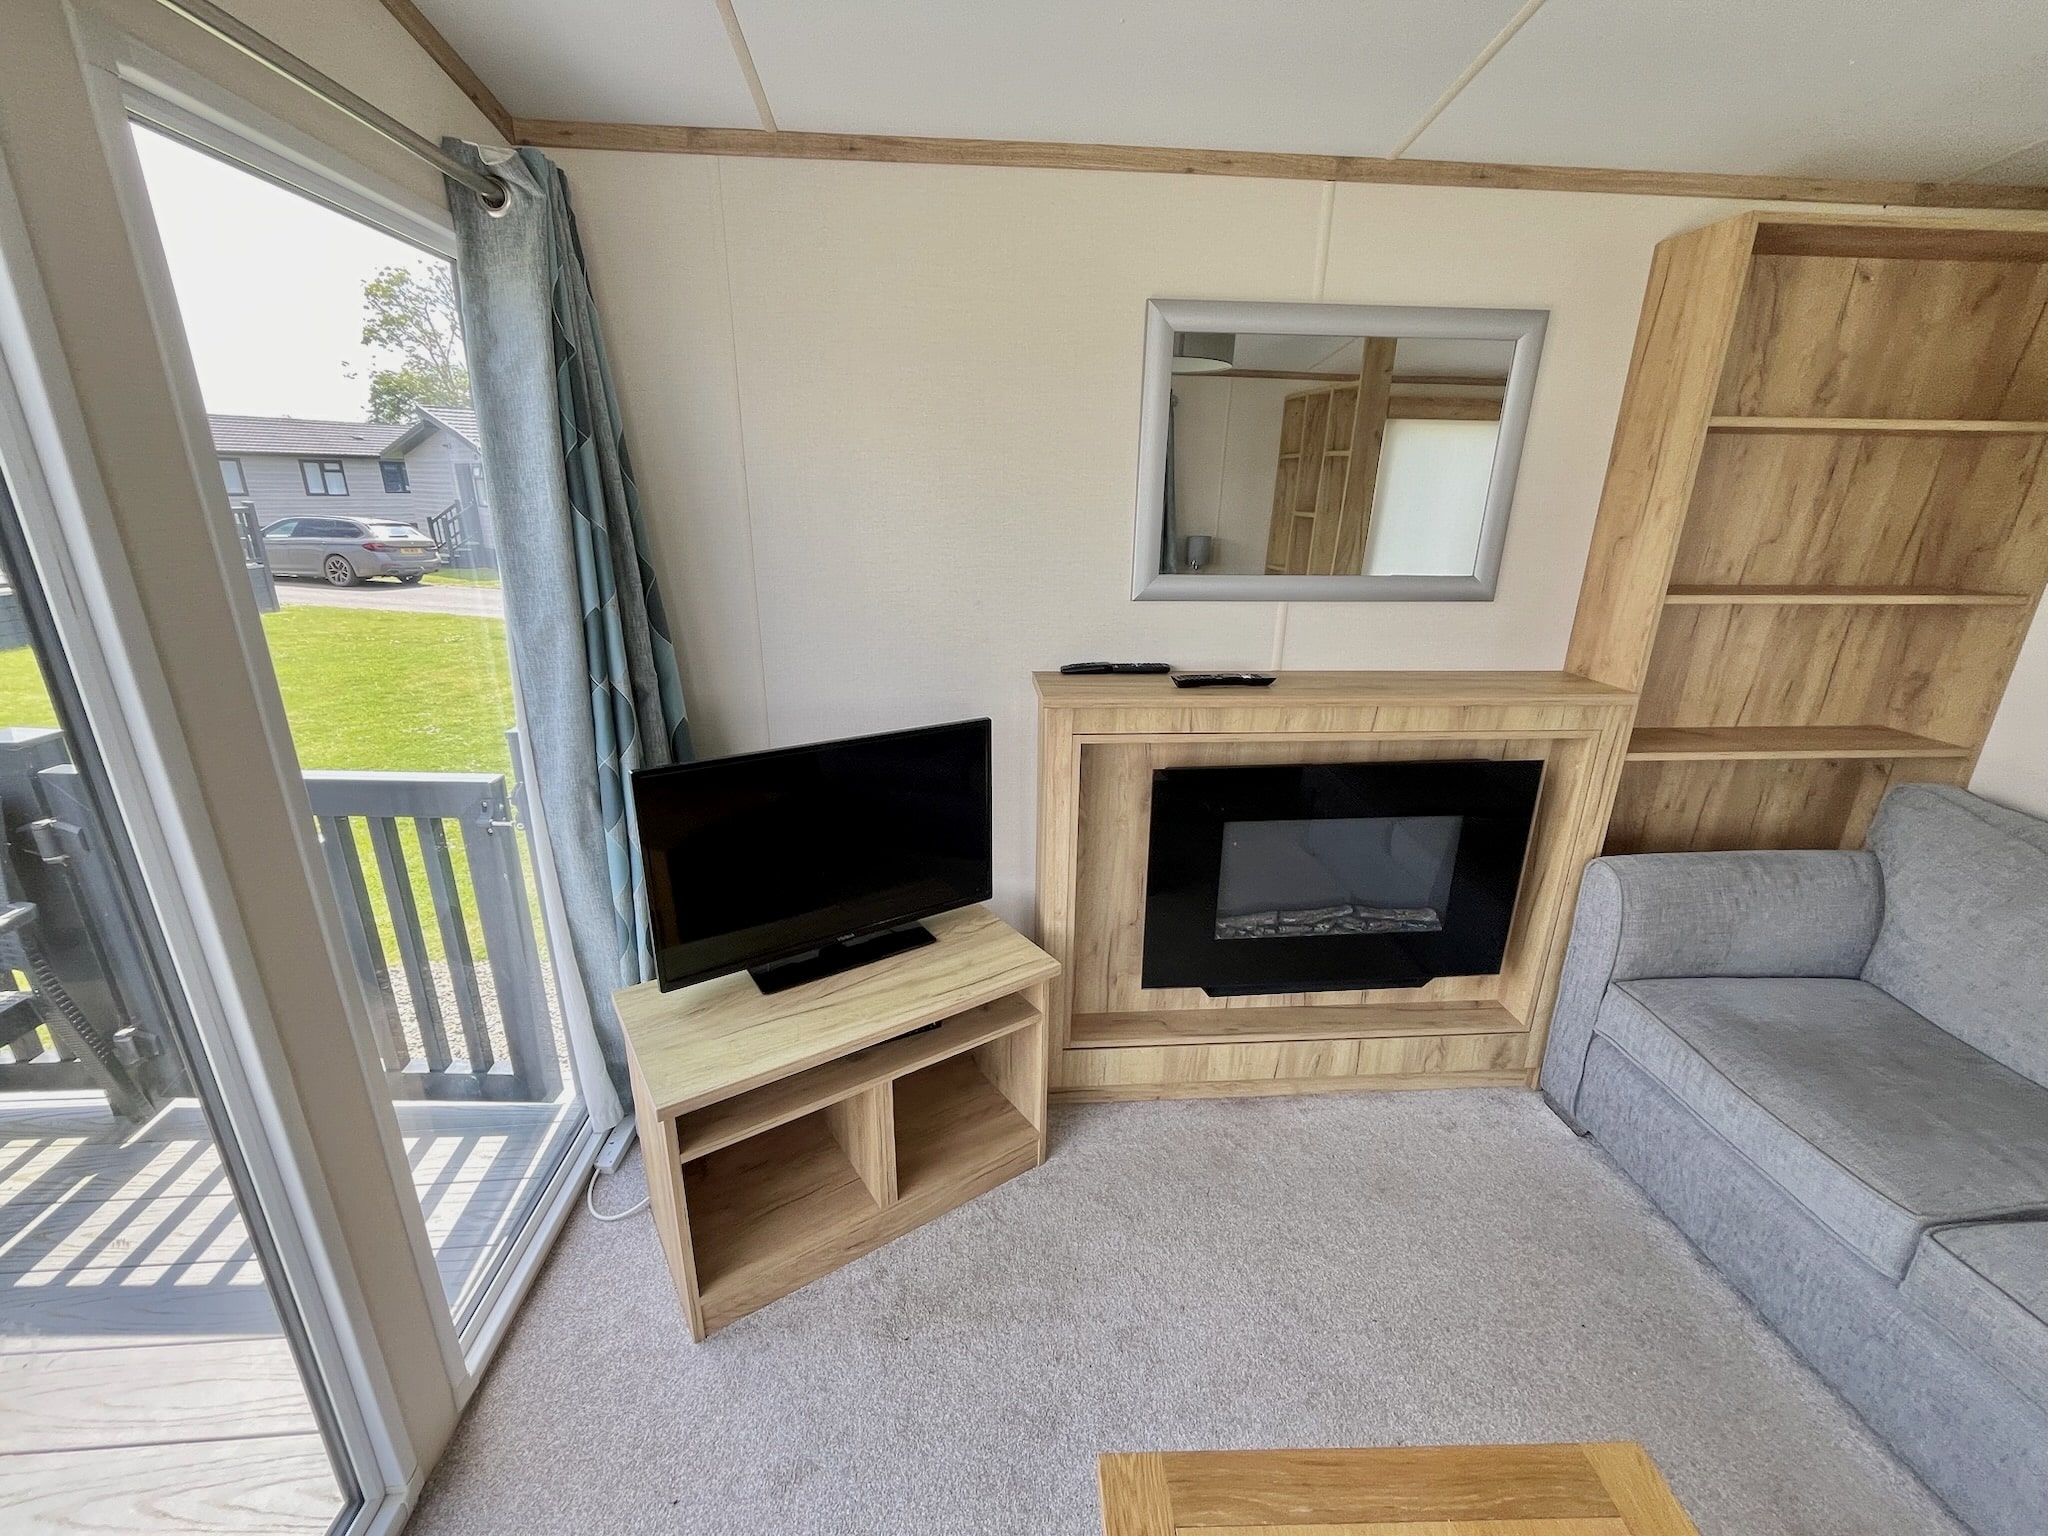 2020 Regal Hemsworth for sale at Bude Holiday Resort, Bude